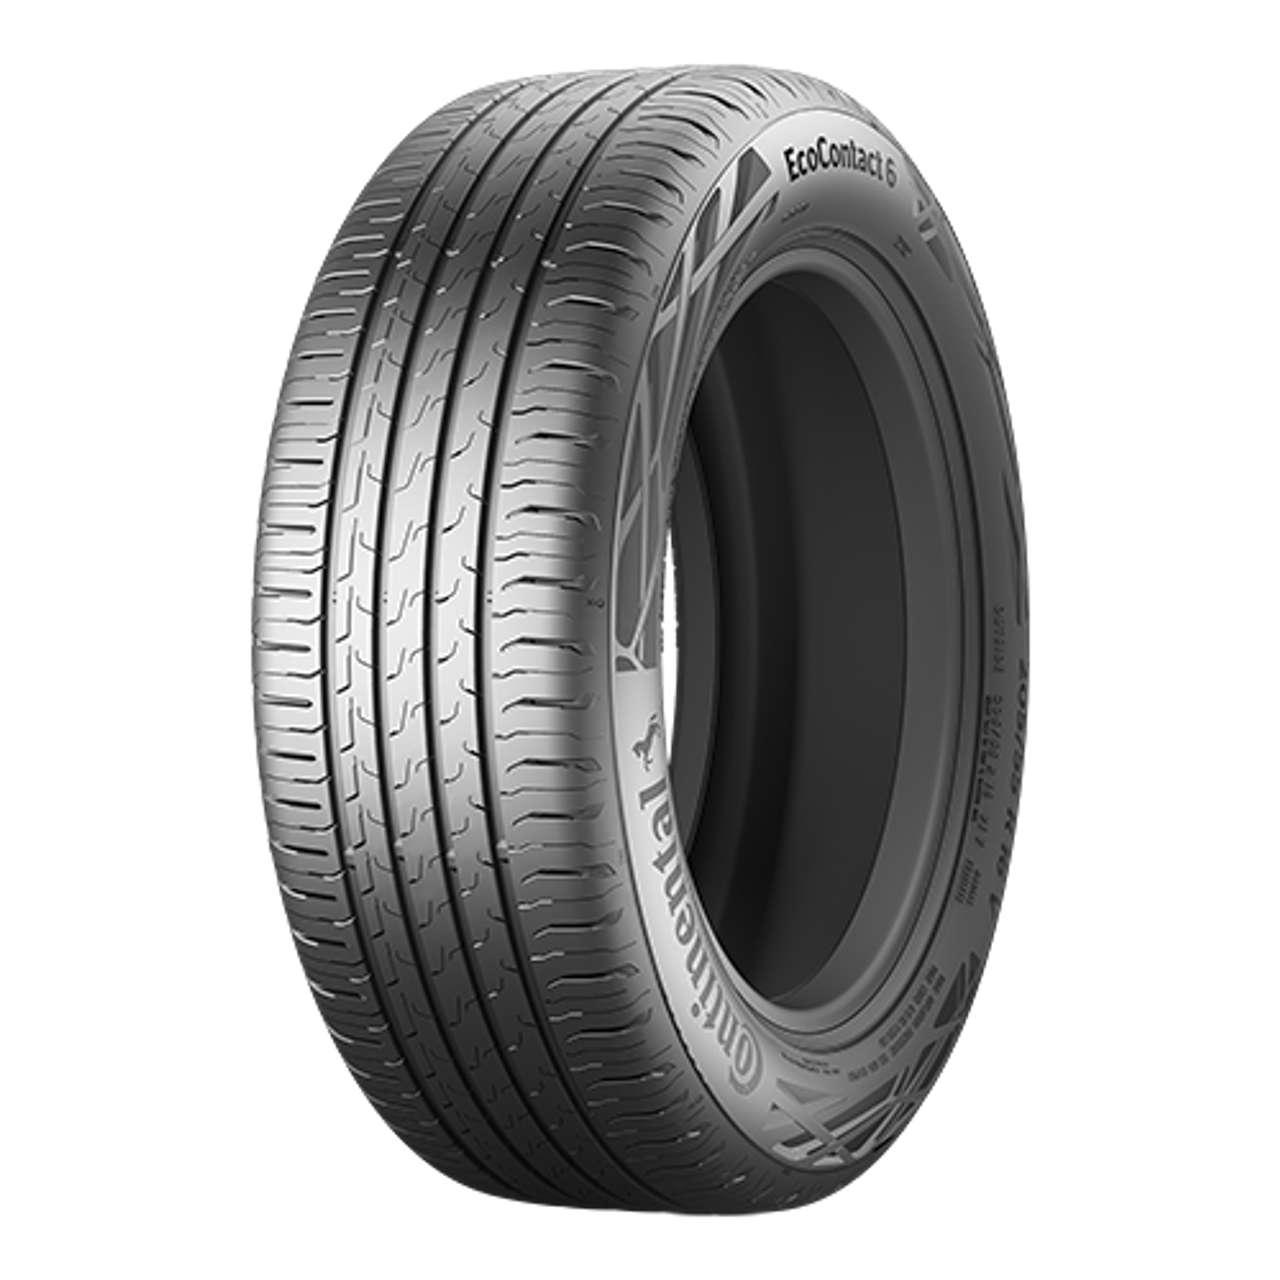 CONTINENTAL ECOCONTACT 6 195/65R15 91H 